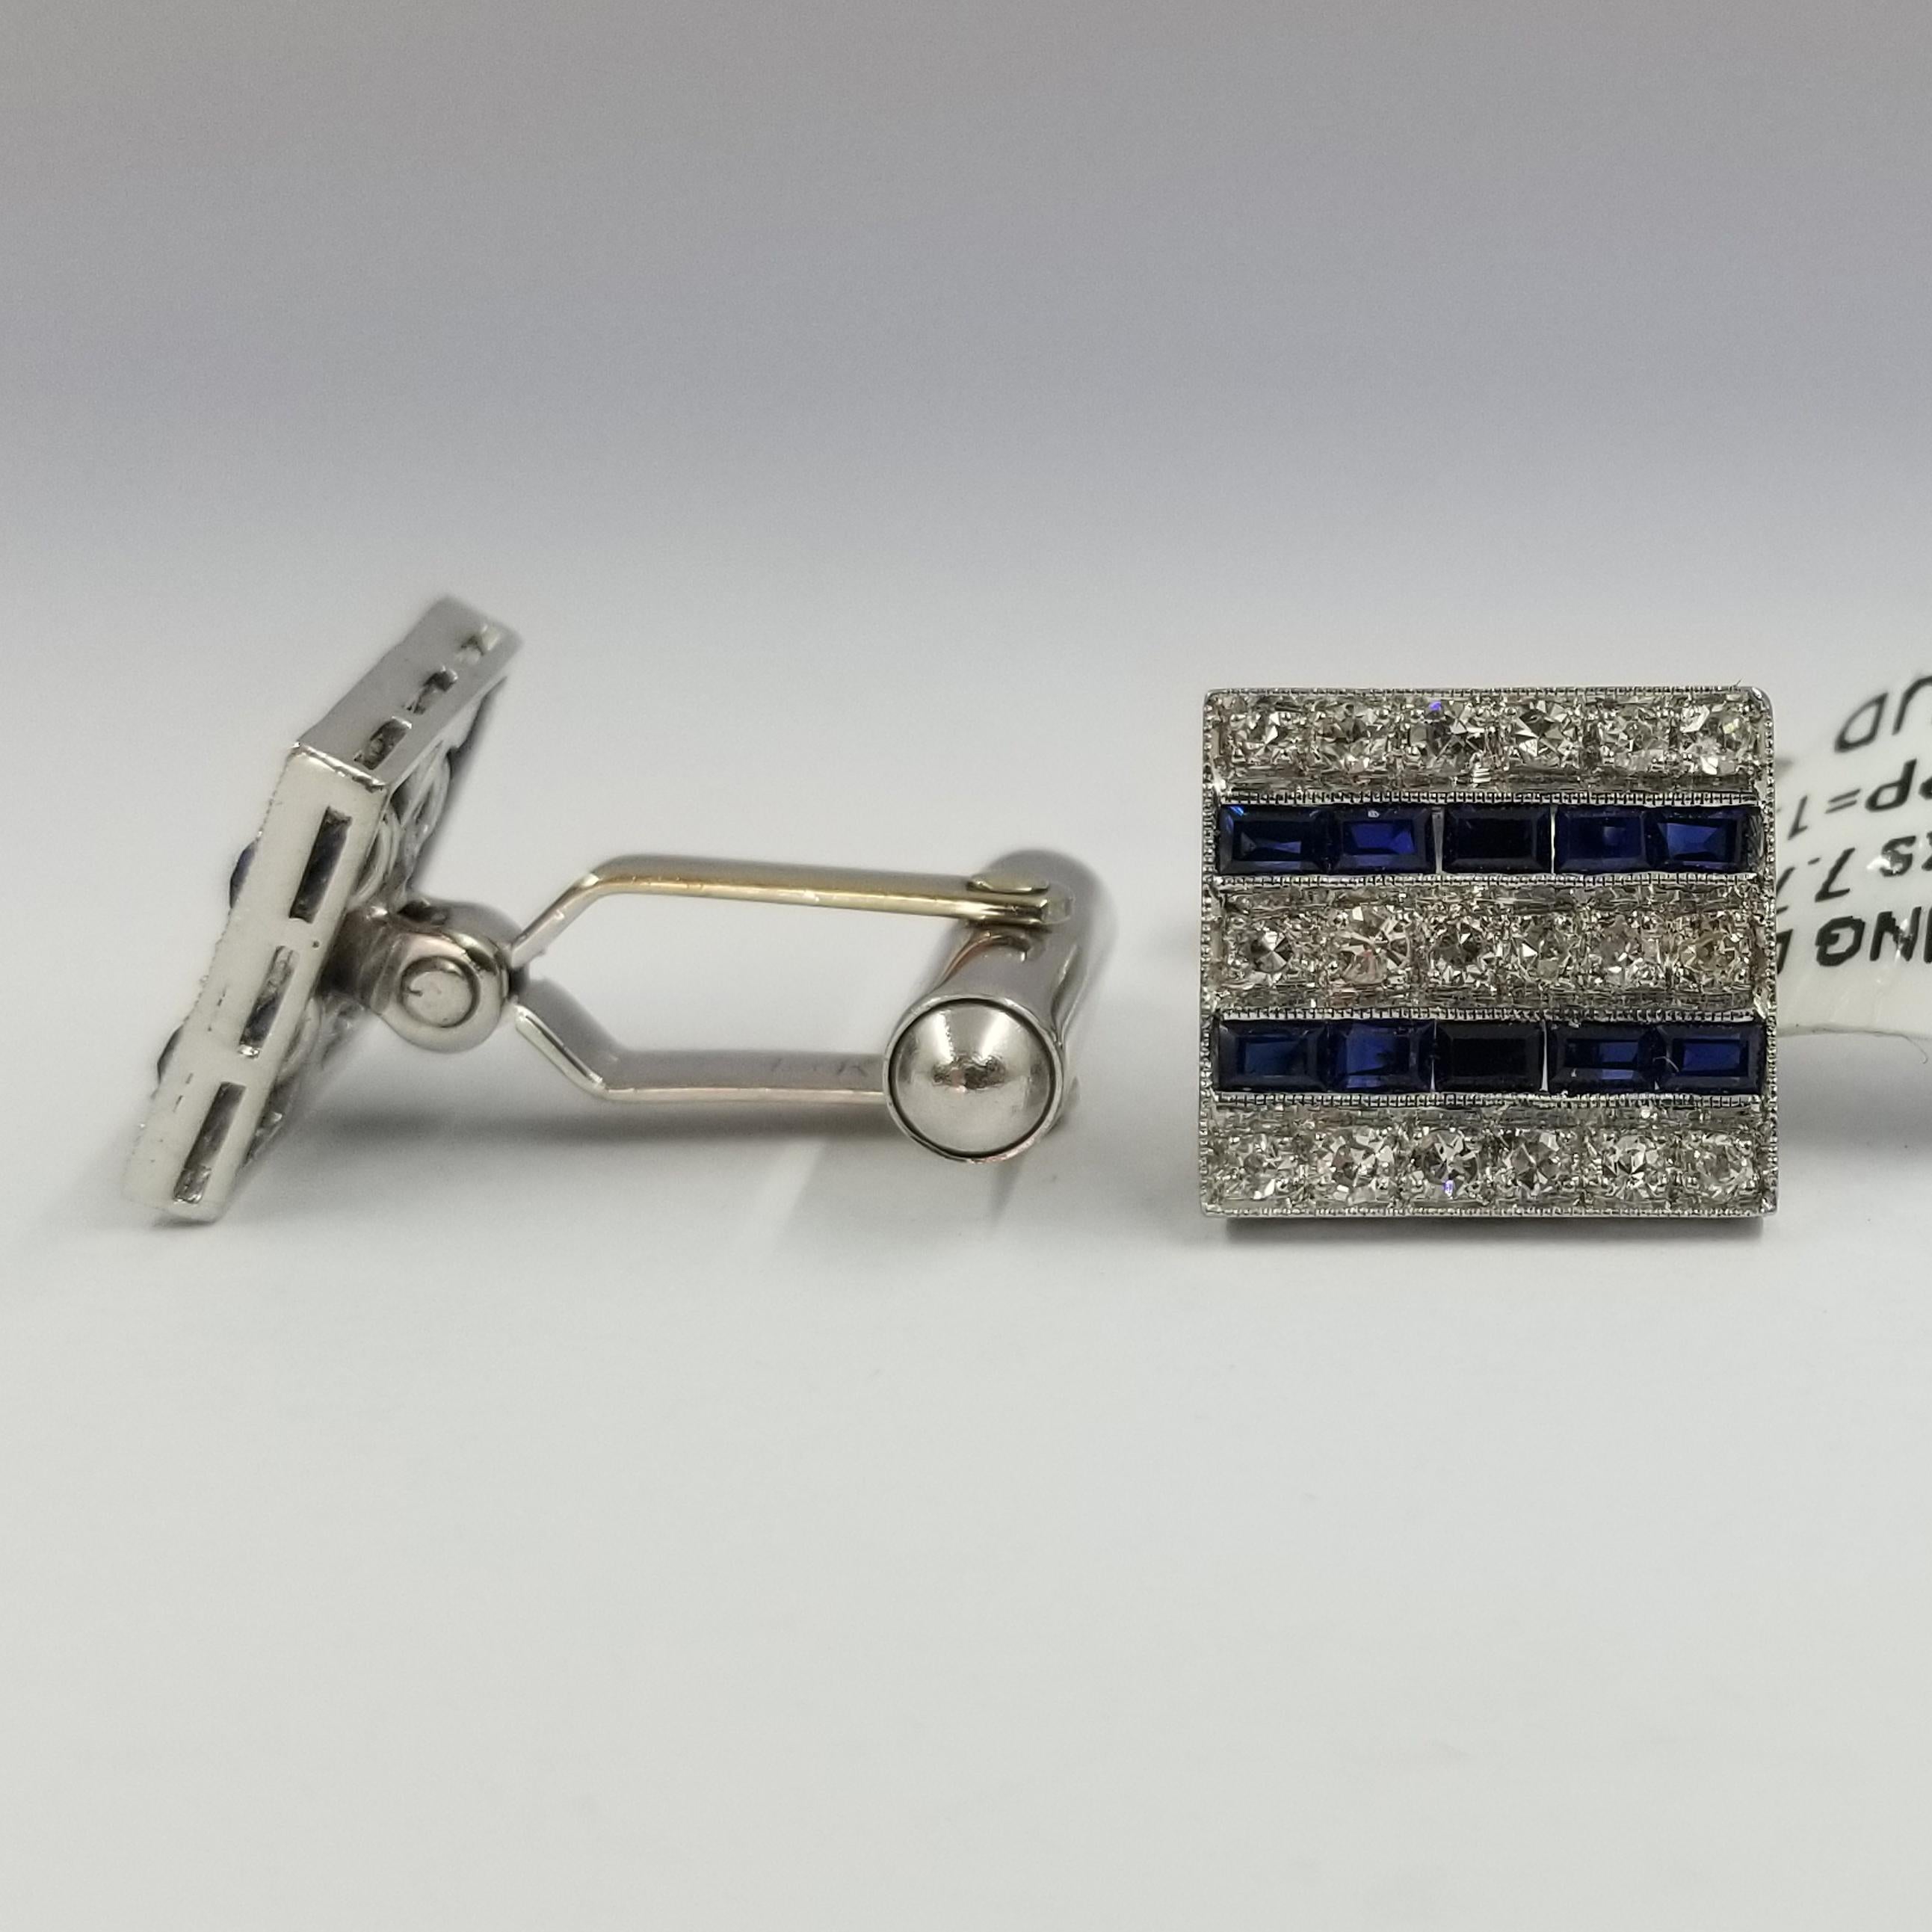 Set of 2 cufflinks crafted in 14 karat white gold (stamped). The hinged fronts feature 36 prong set single cut diamonds and 20 channel-set baguette cut sapphires. The diamond weight totals approximately 0.36 carat; the sapphire weight totals